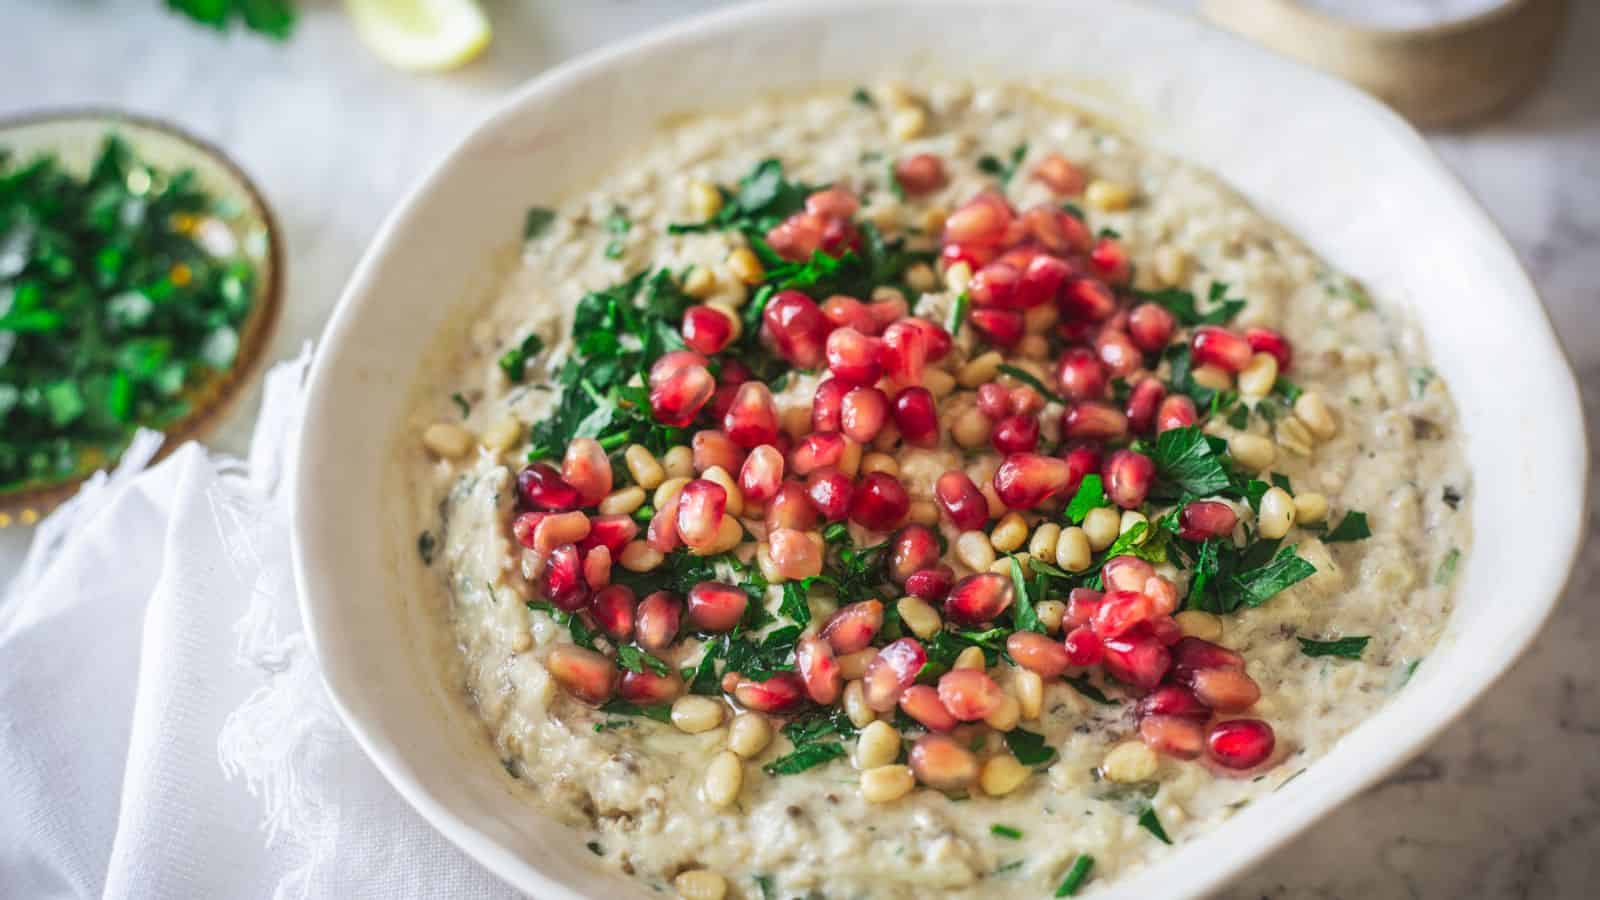 Baba ganoush on a plate with pomegranate seeds, parsley.